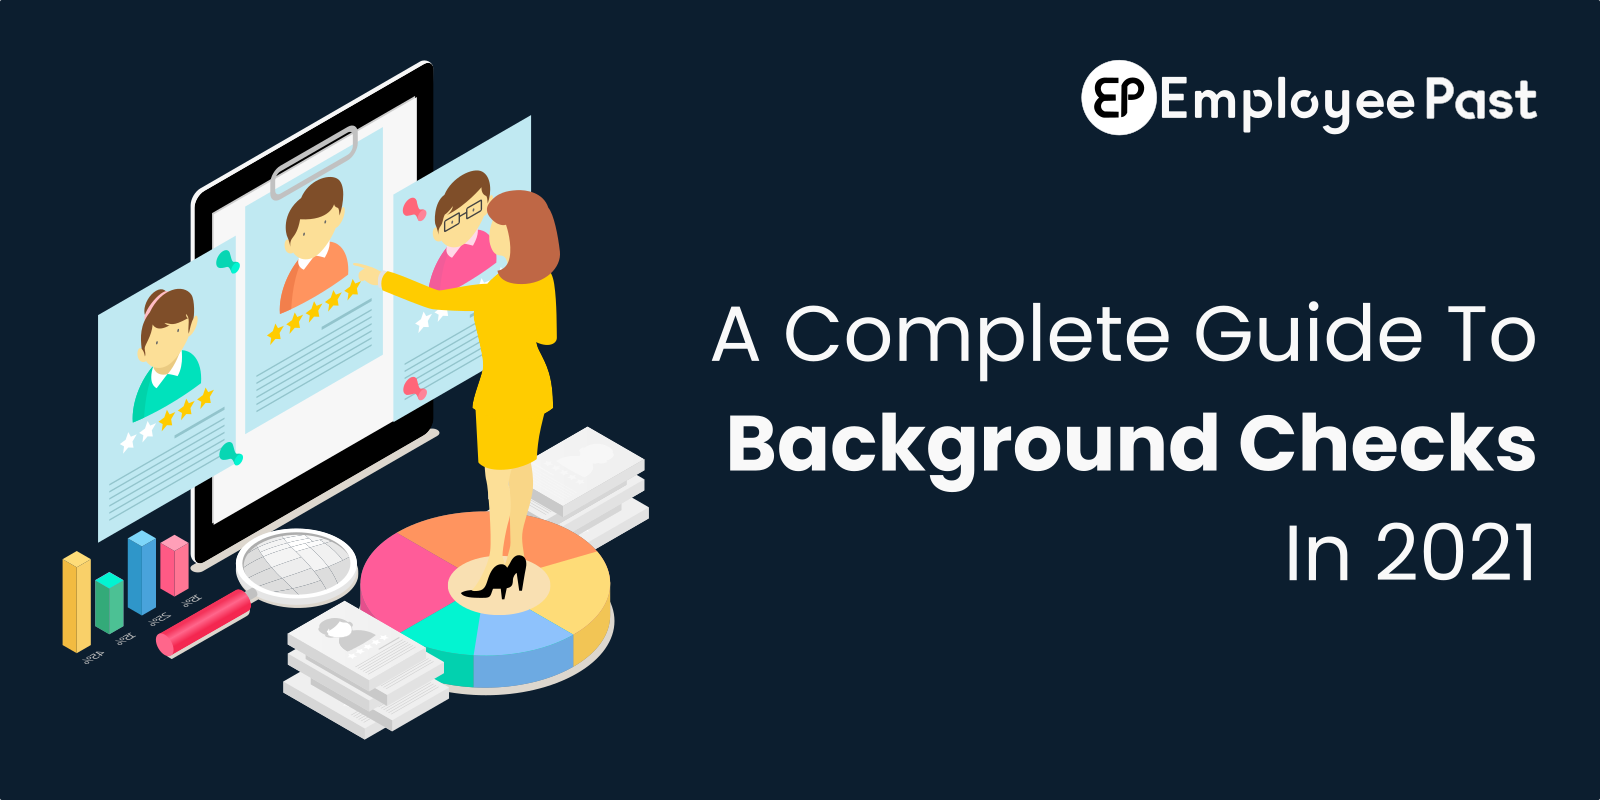 A Complete Guide To Background Checks In 2021